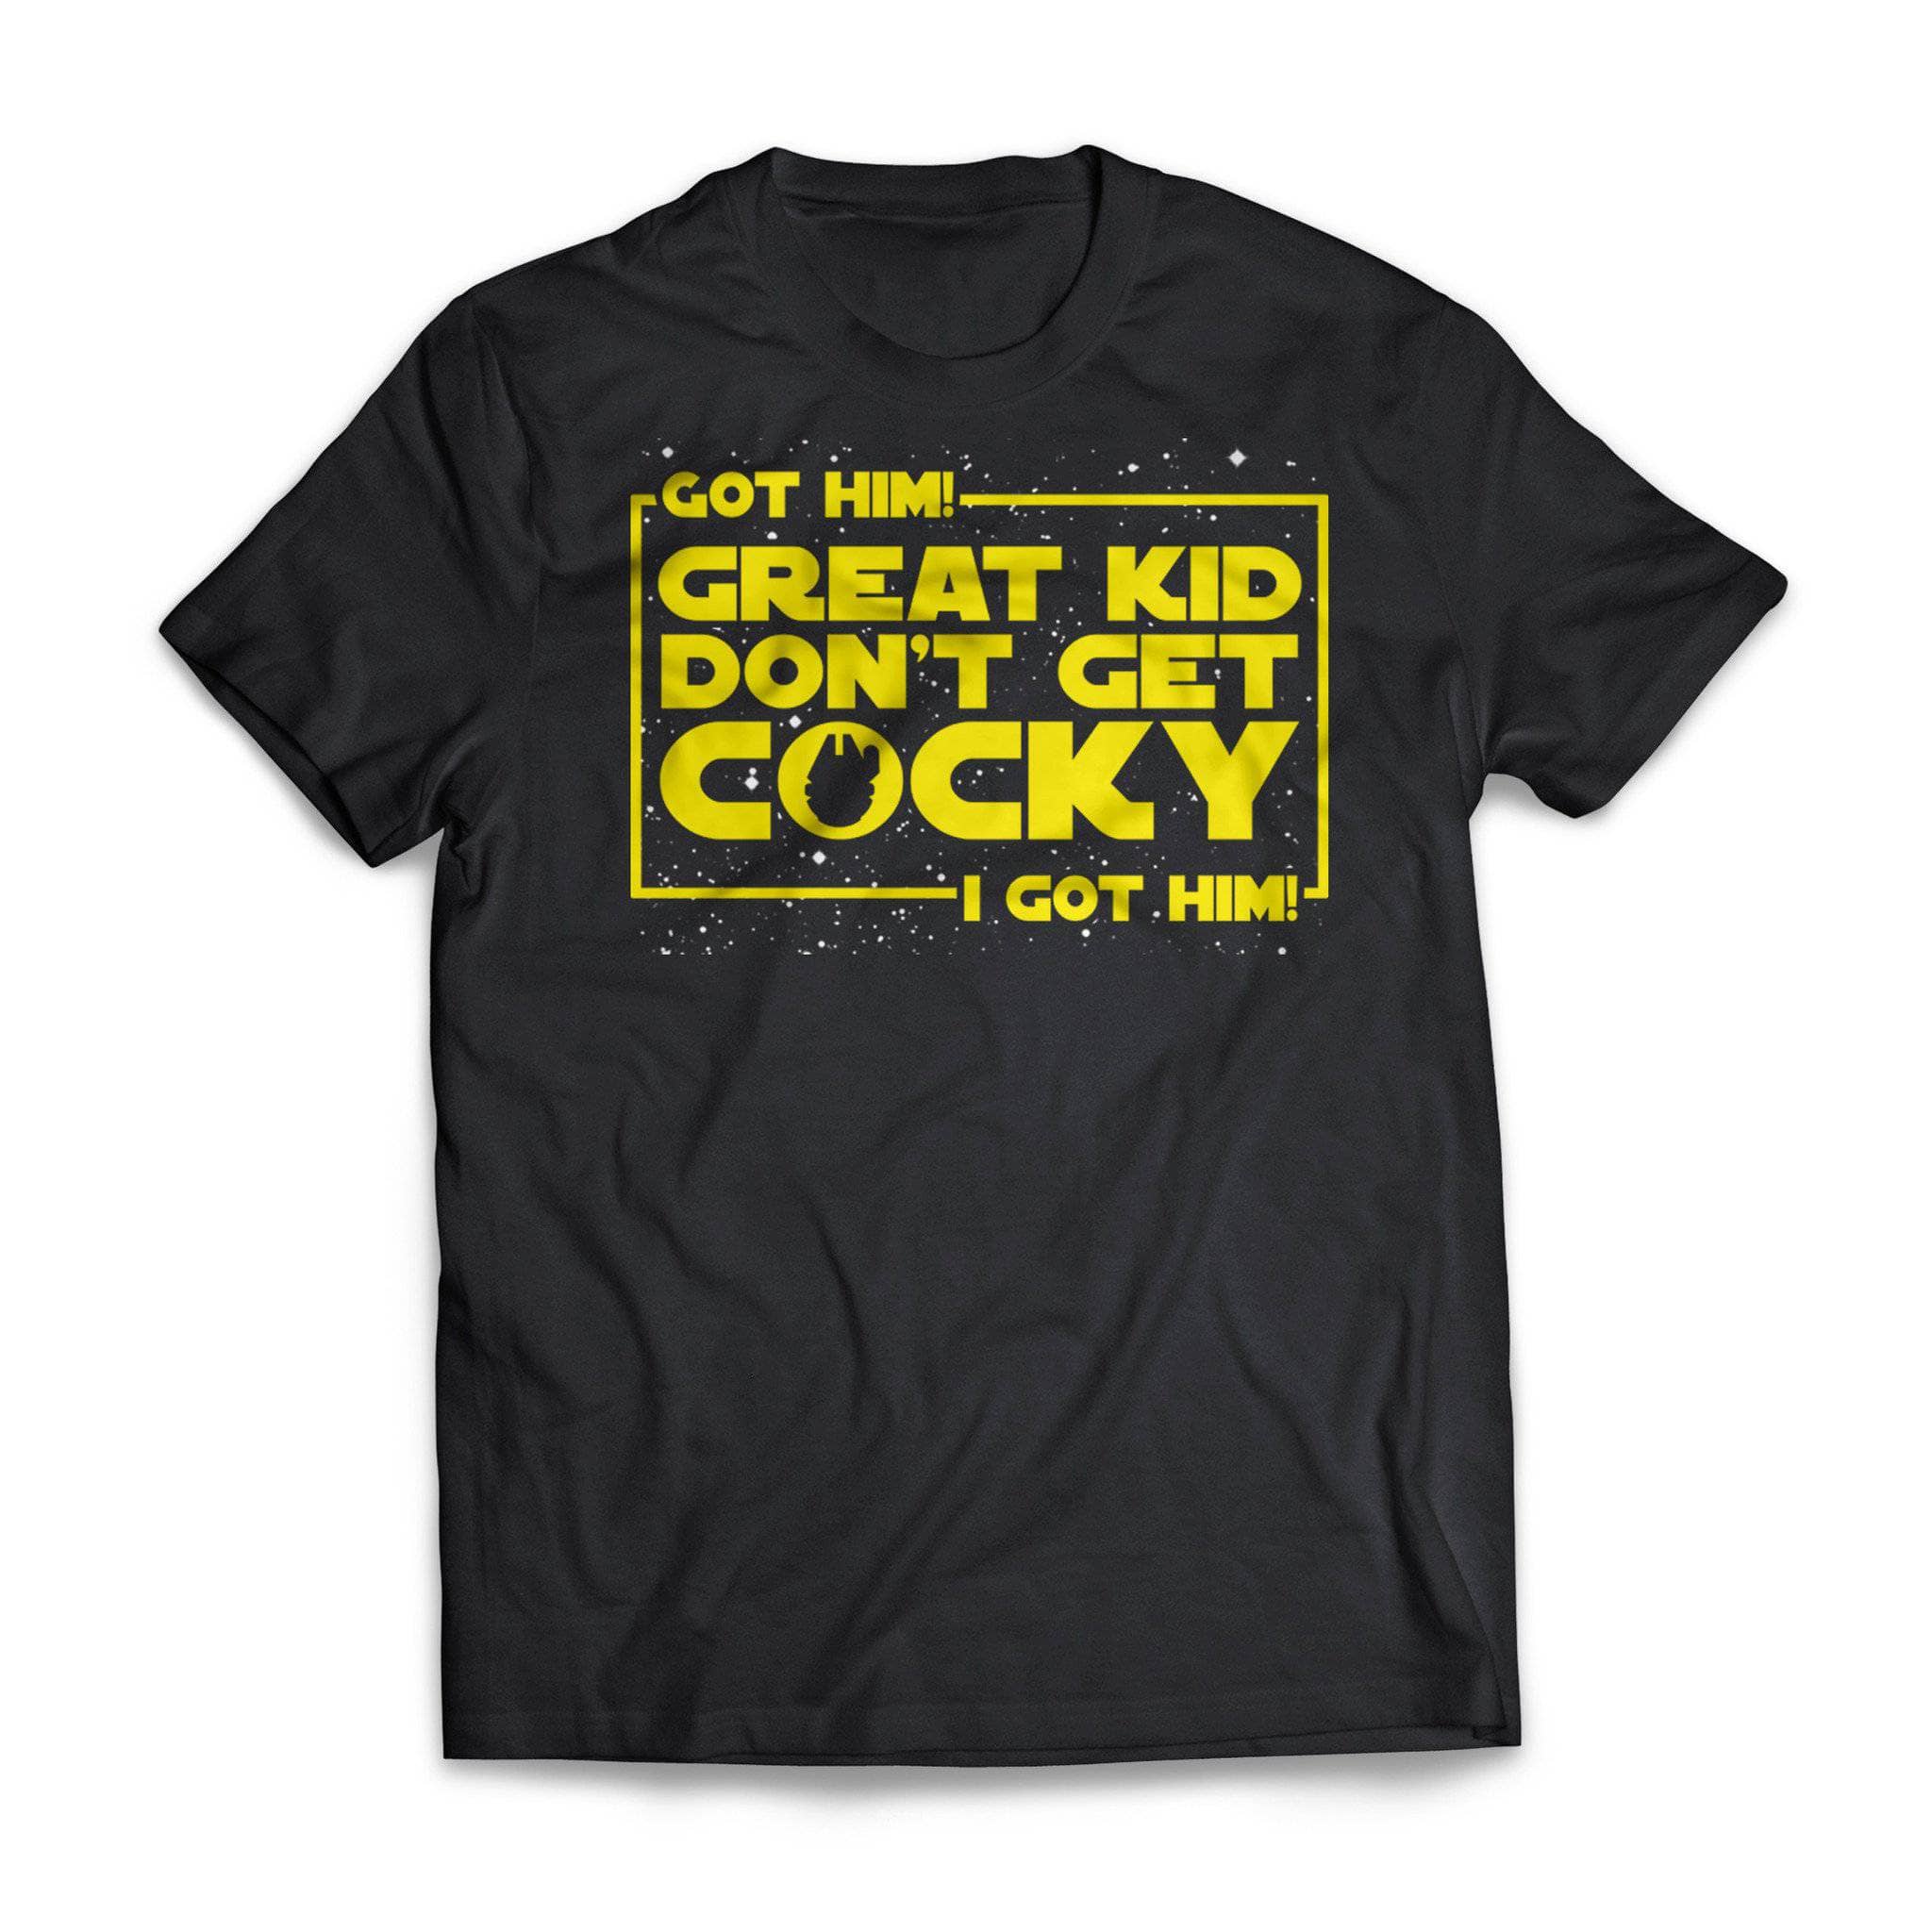 Don't Get Cocky Short Sleeve Tee